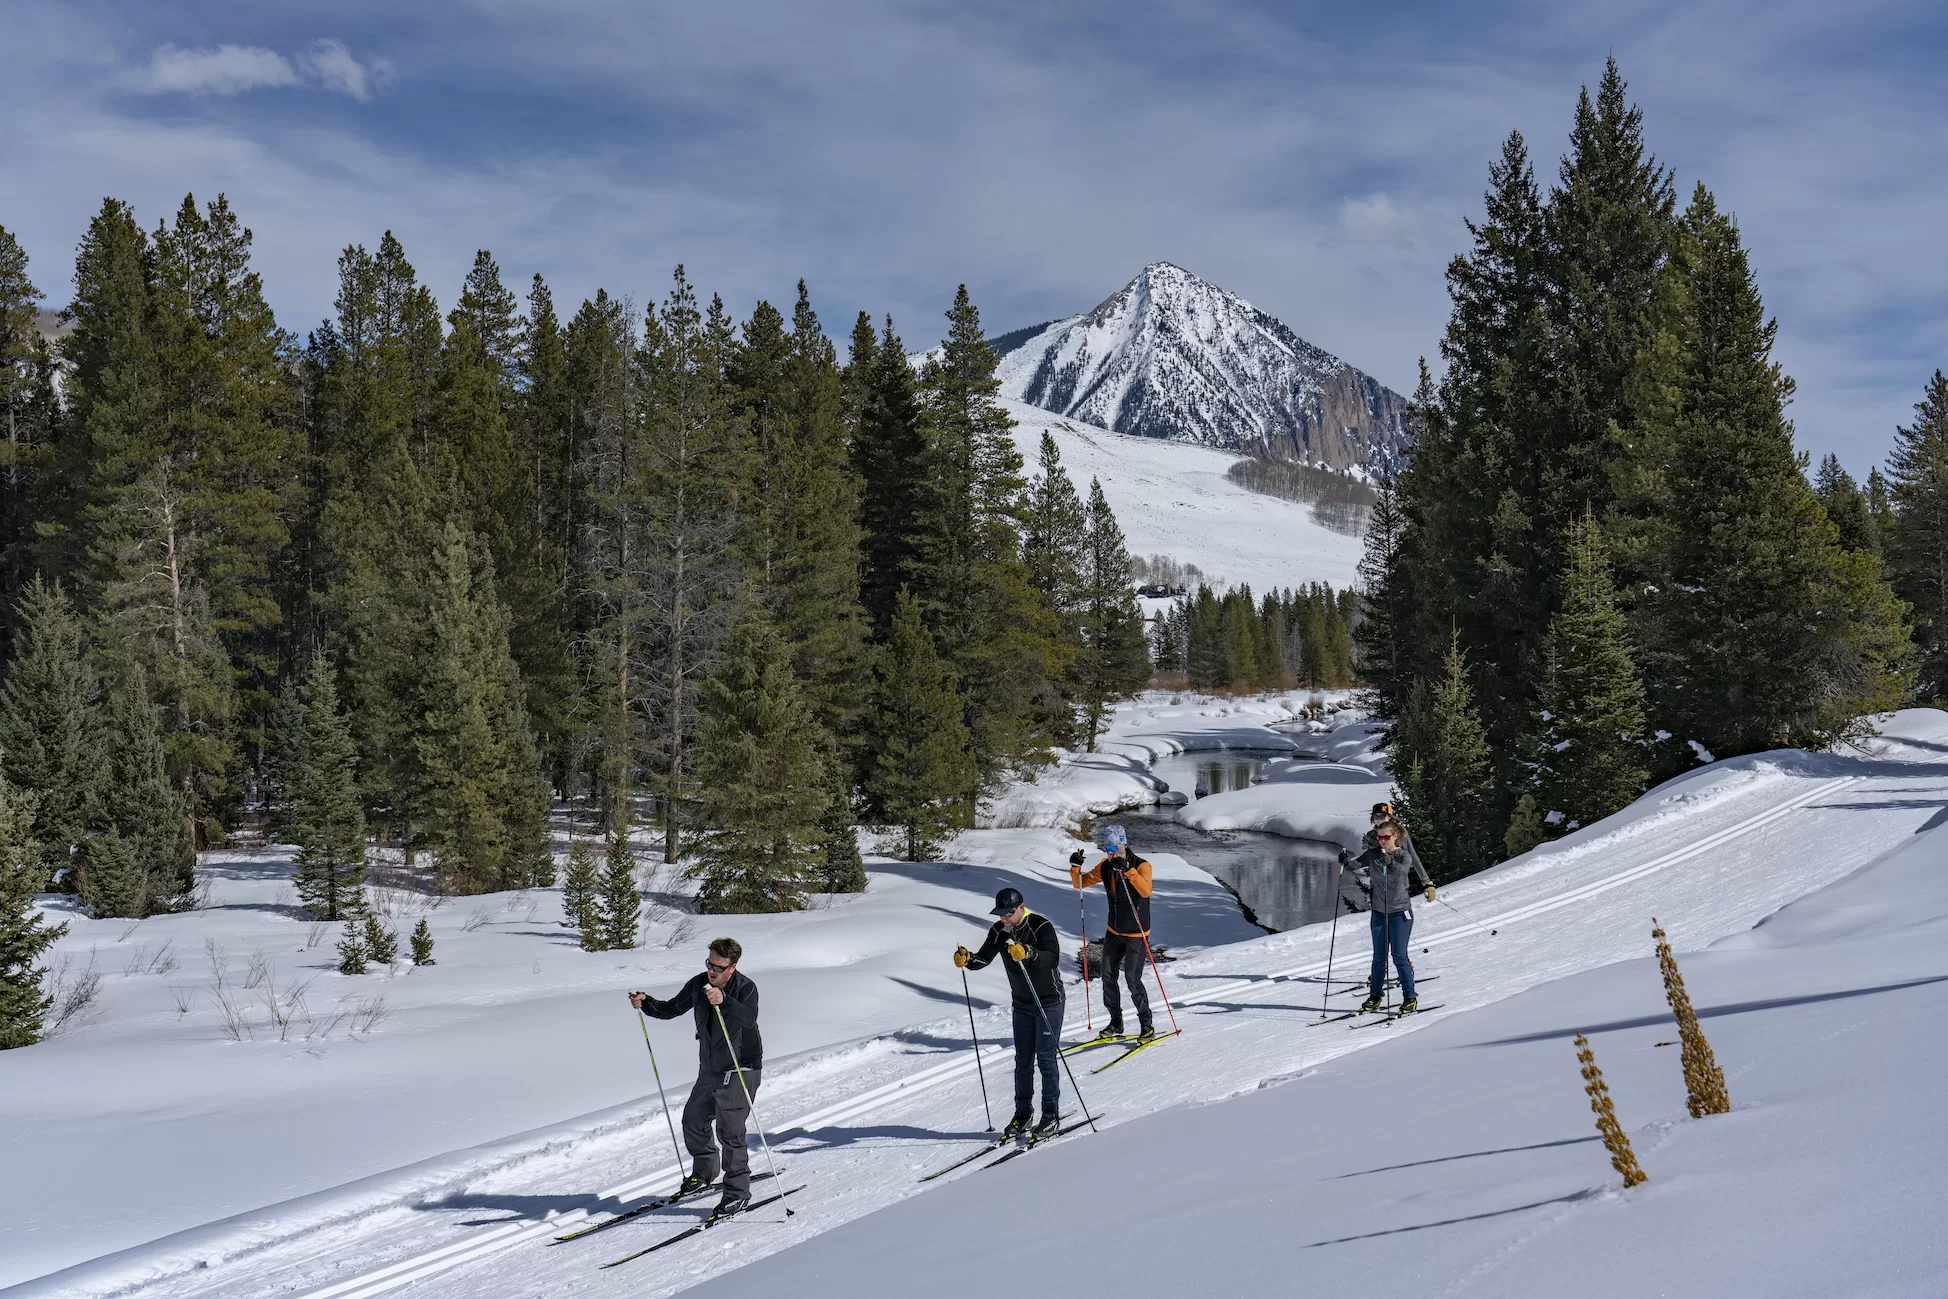 Four people on nordic skis ski on a groomed snow track. There is a mountain peak in the background.